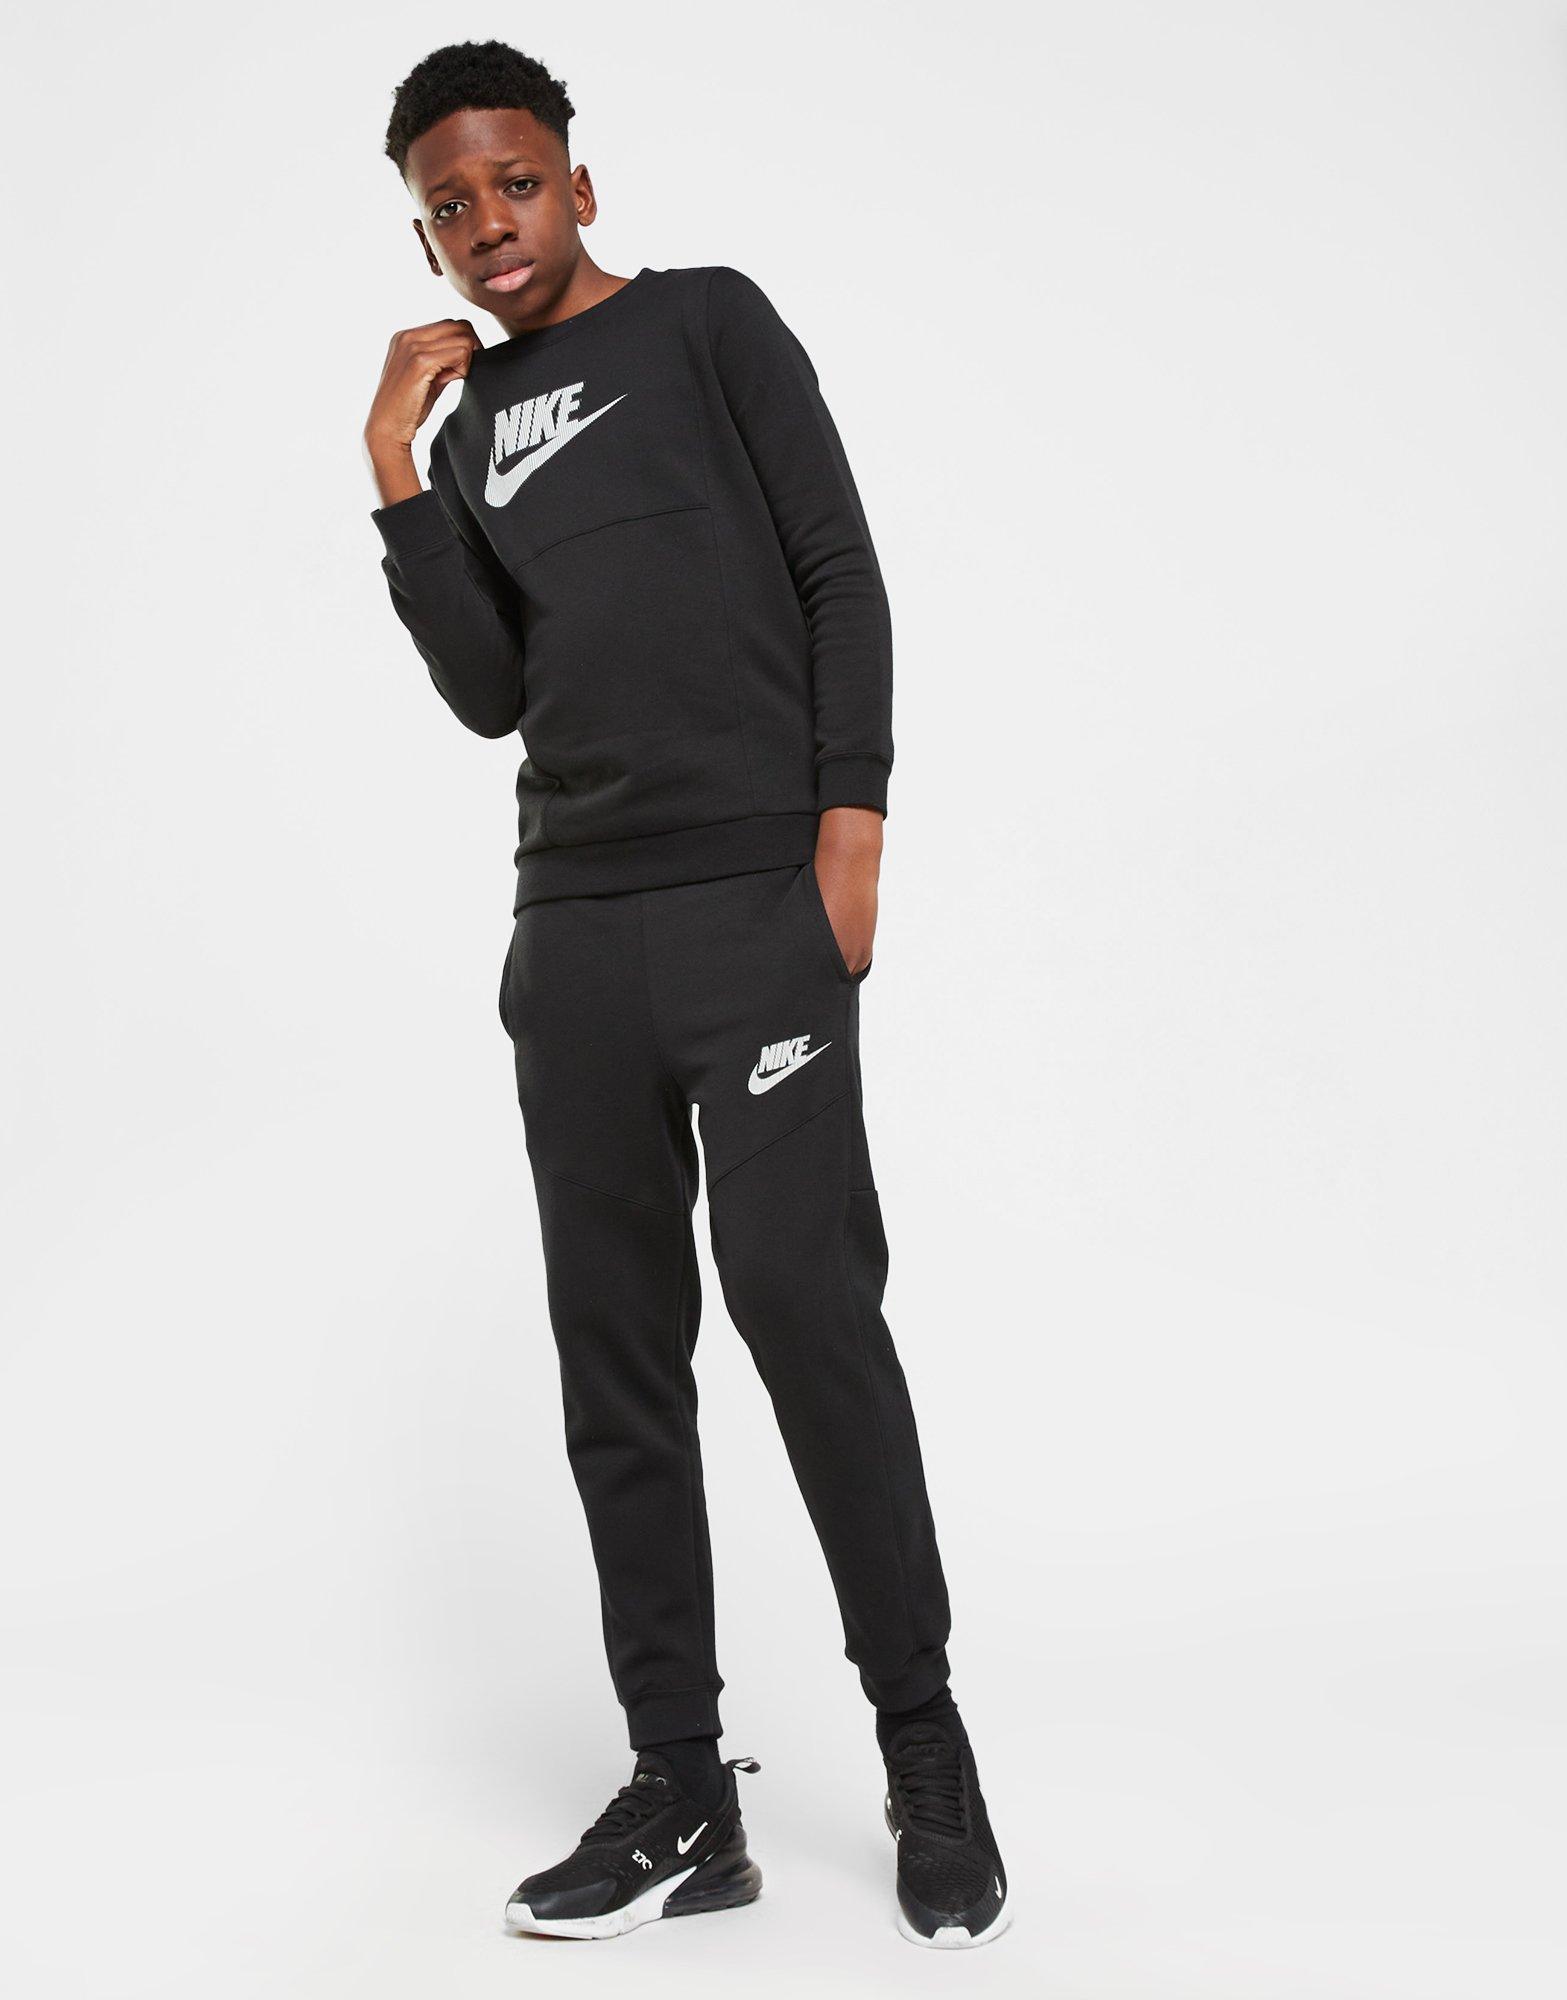 nike hybrid tracksuit mens,Save up to 19%,royaltechsystems.co.in